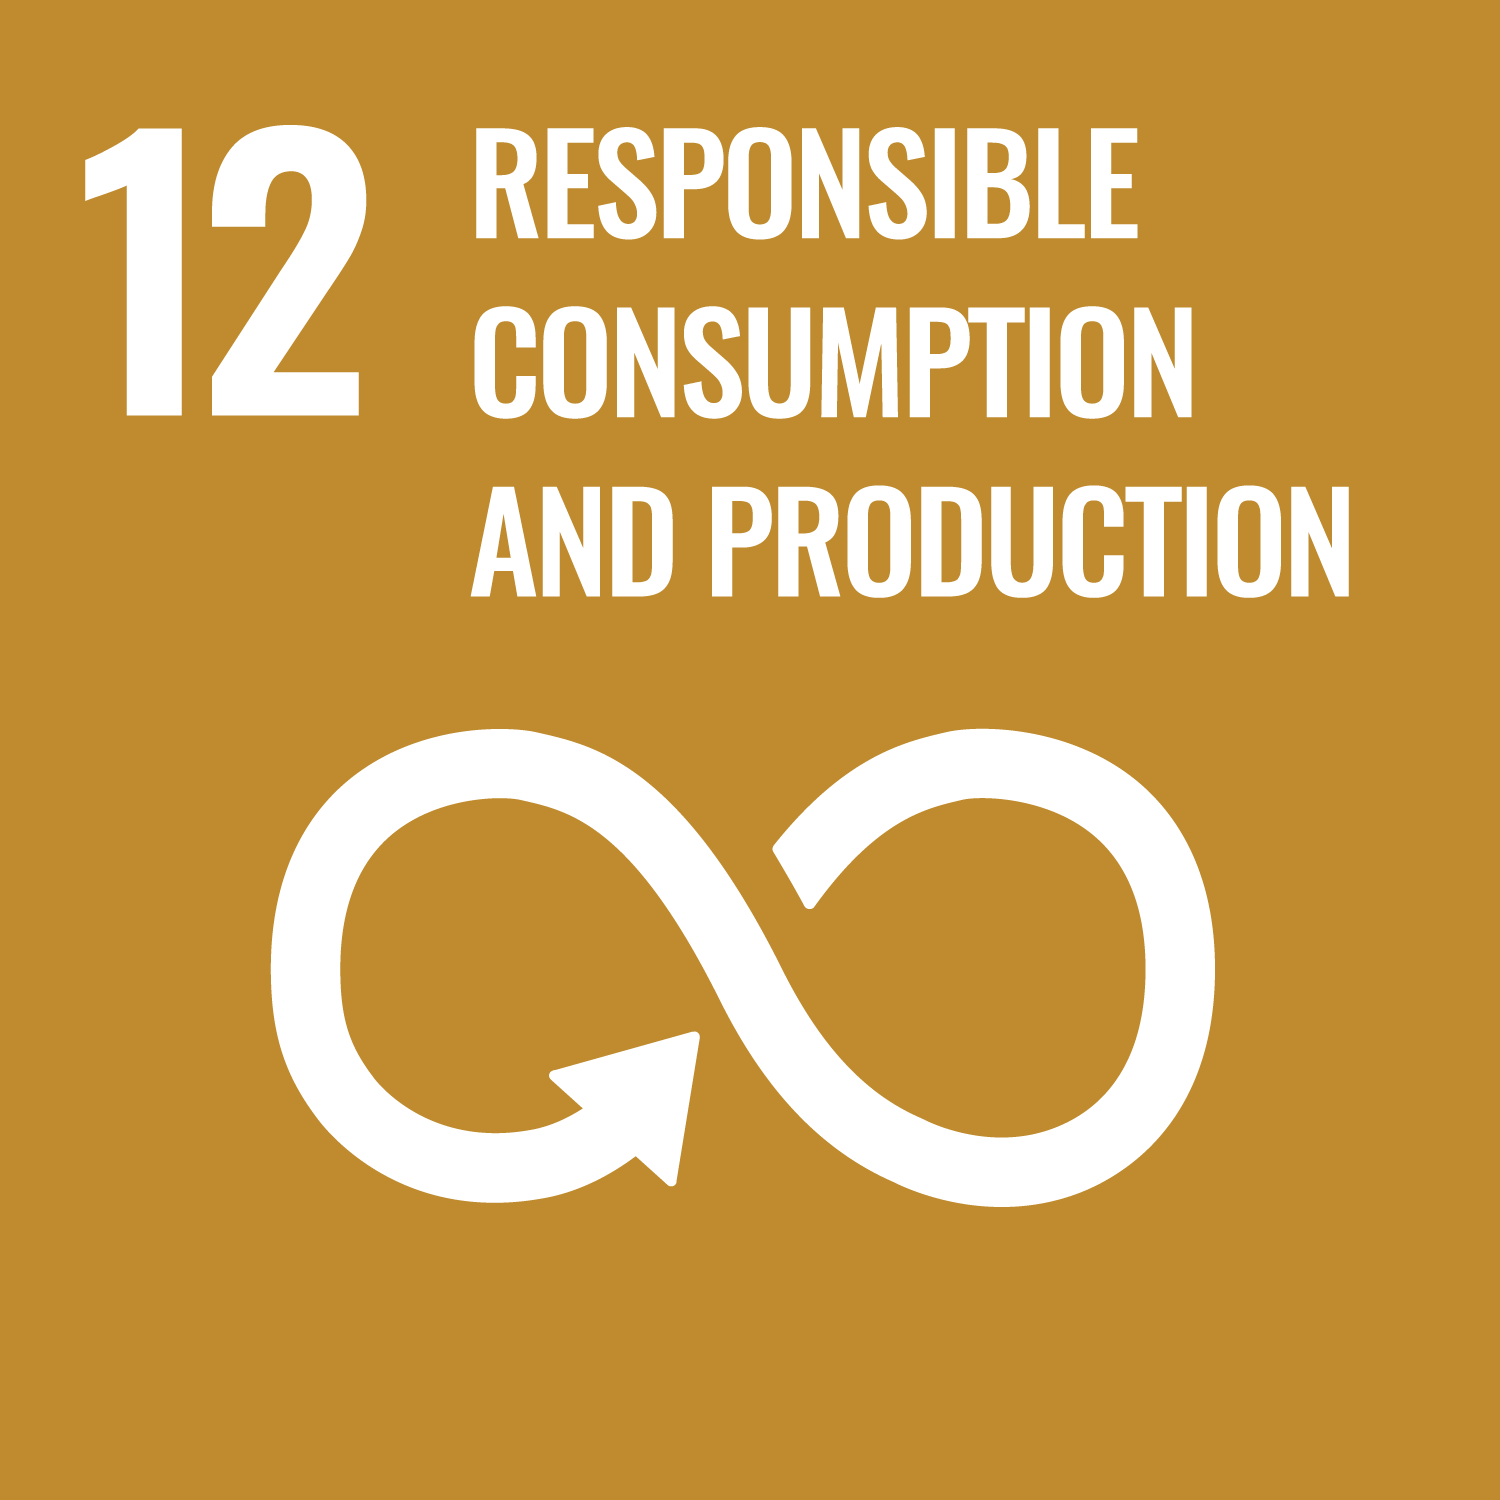 the phrase 12 responsible consumption and production in white on a brown background